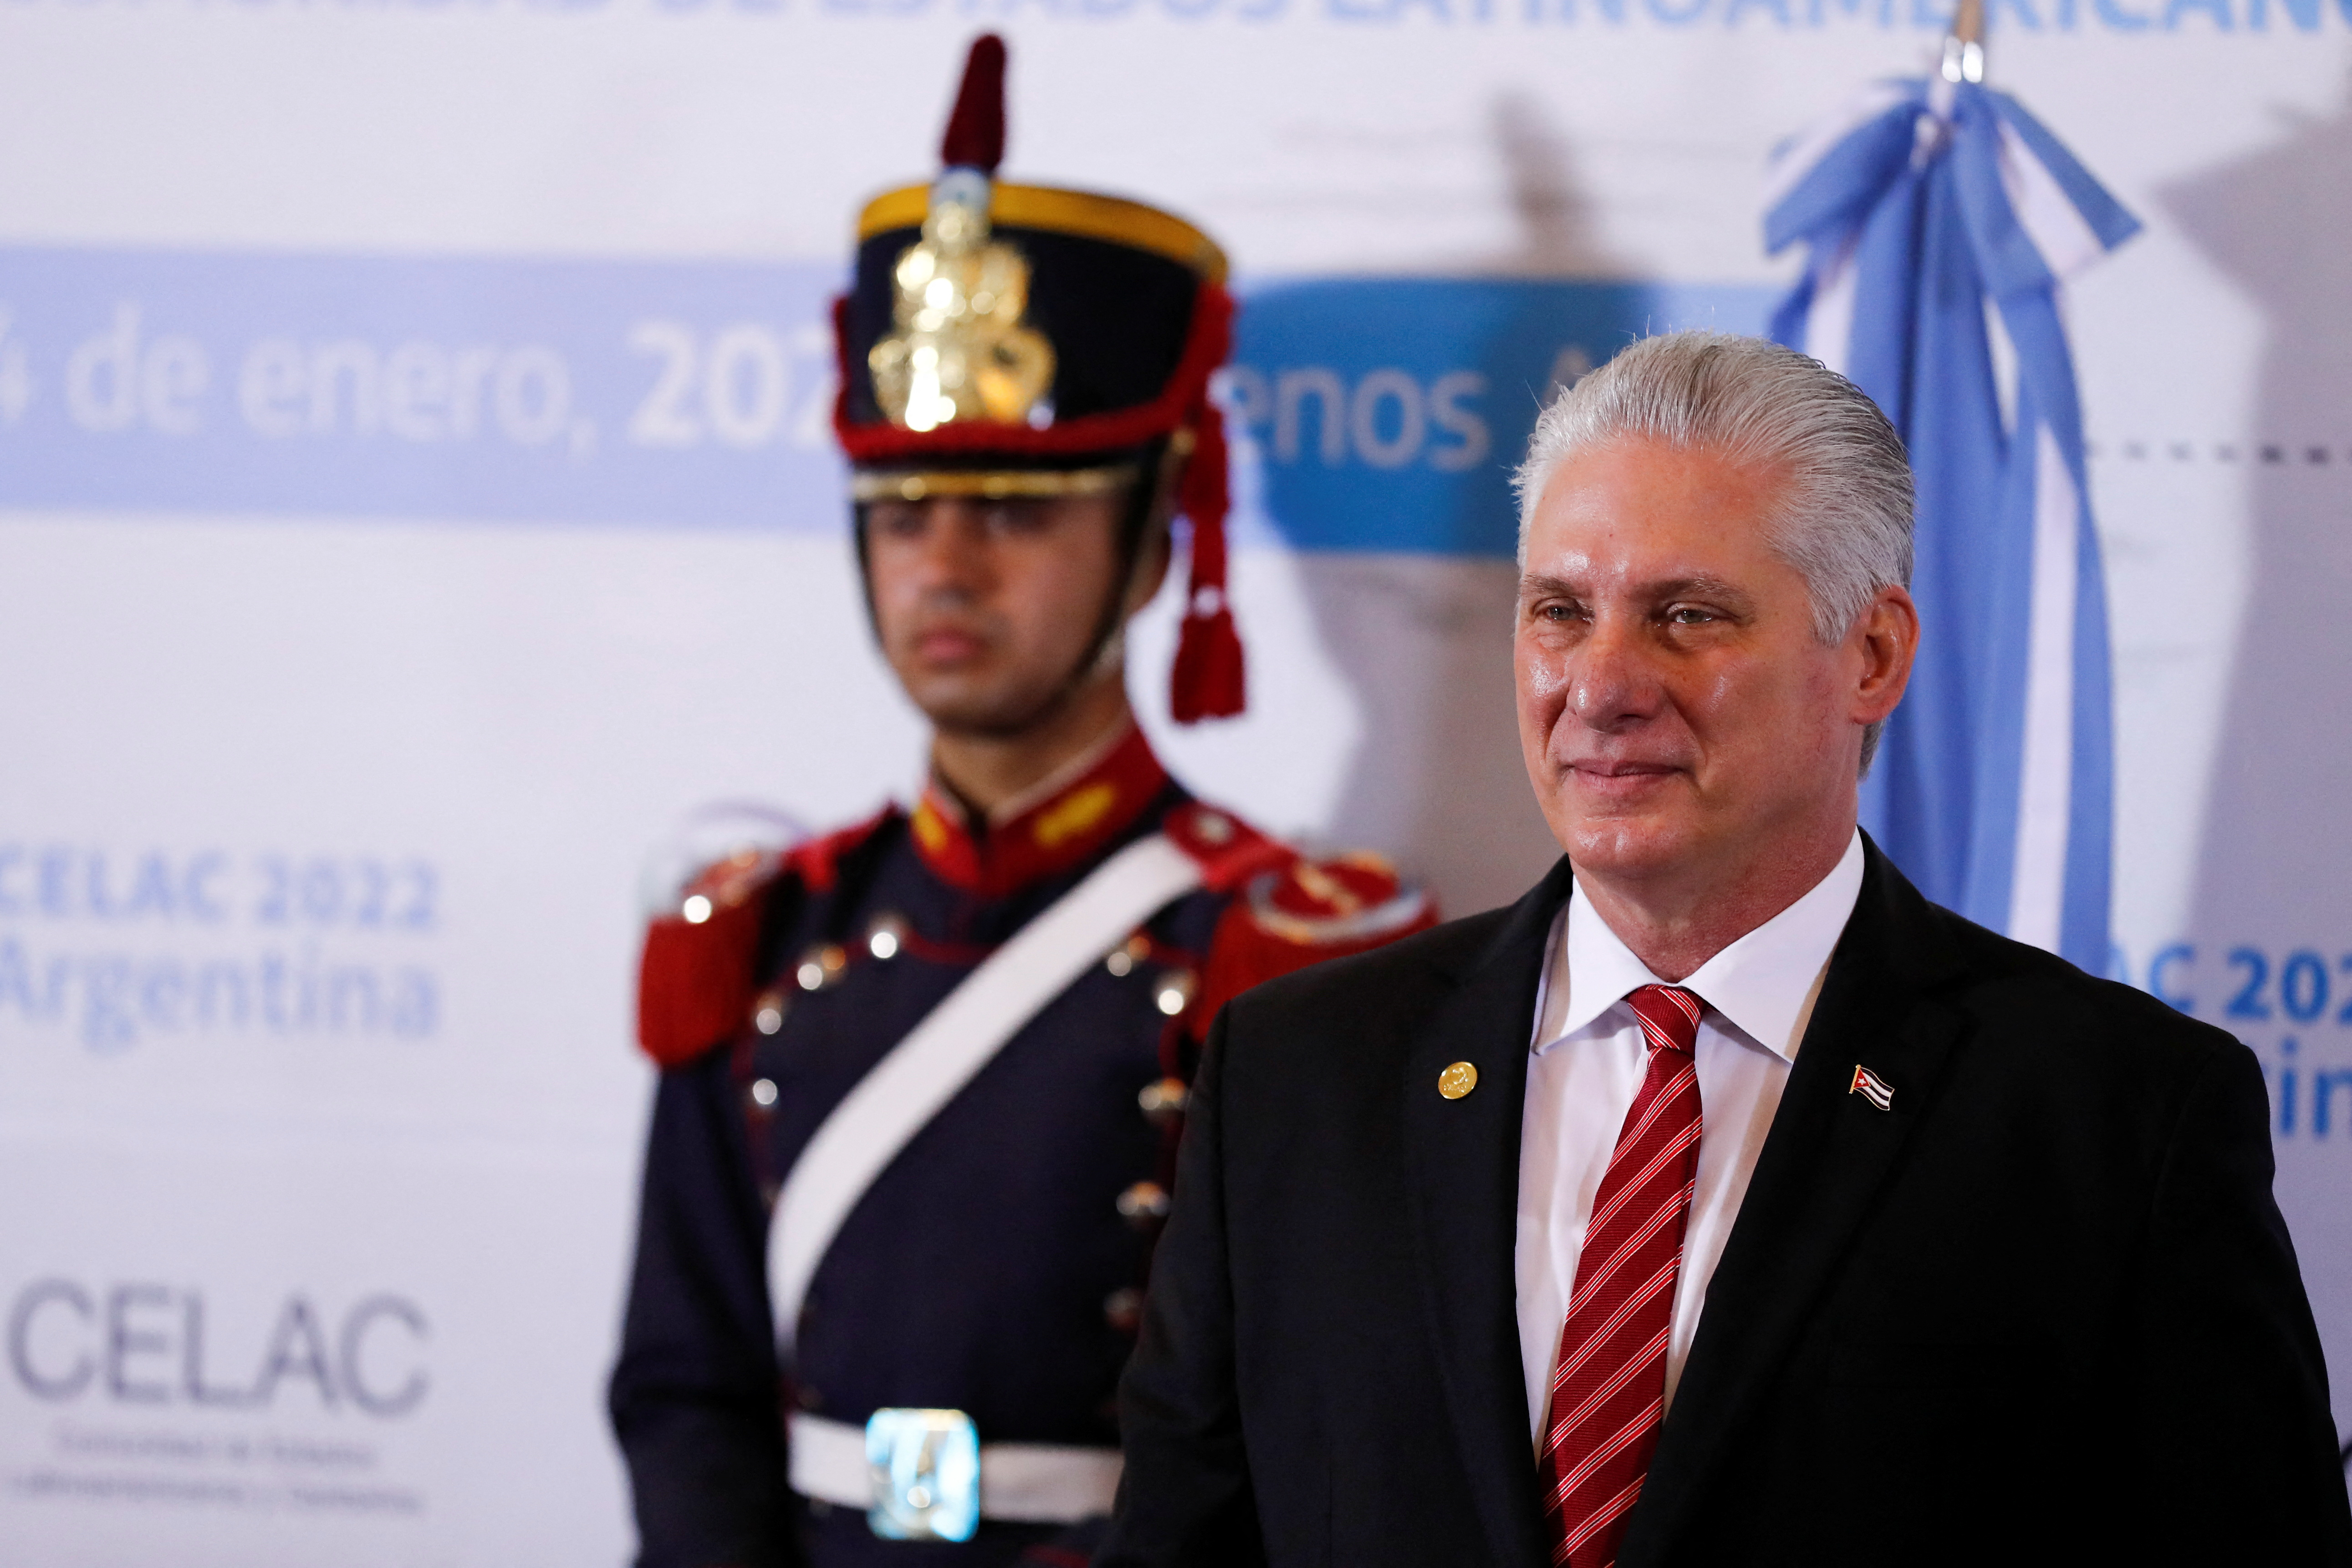 The Cuban dictator Miguel Díaz-Canel participated in the CELAC summit in Buenos Aires (REUTERS / Agustin Marcarian)